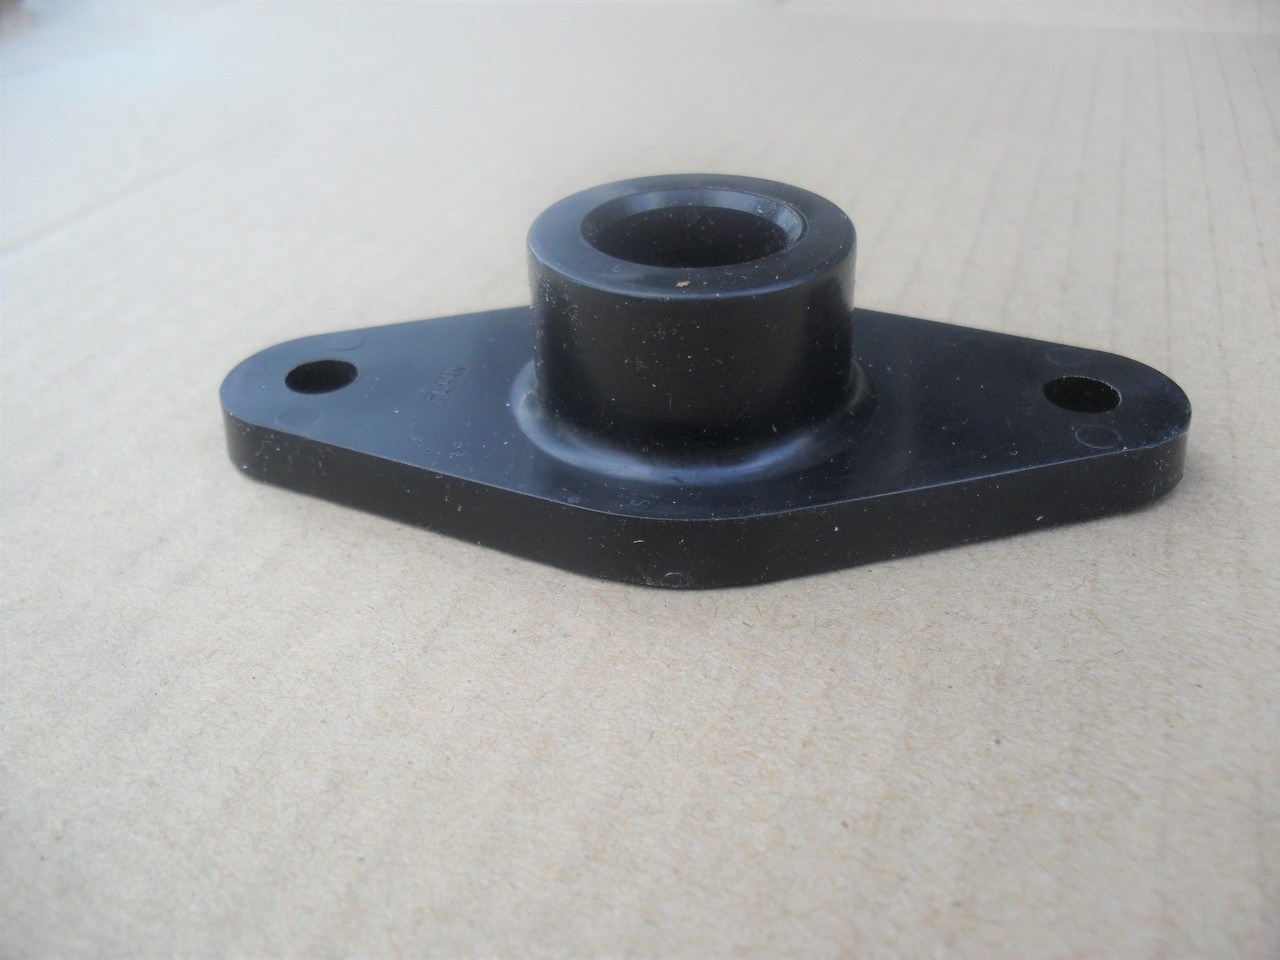 Auger Bushing Bearing for AMF 54837, 577023 Snowblower, snowthrower, snow blower thrower